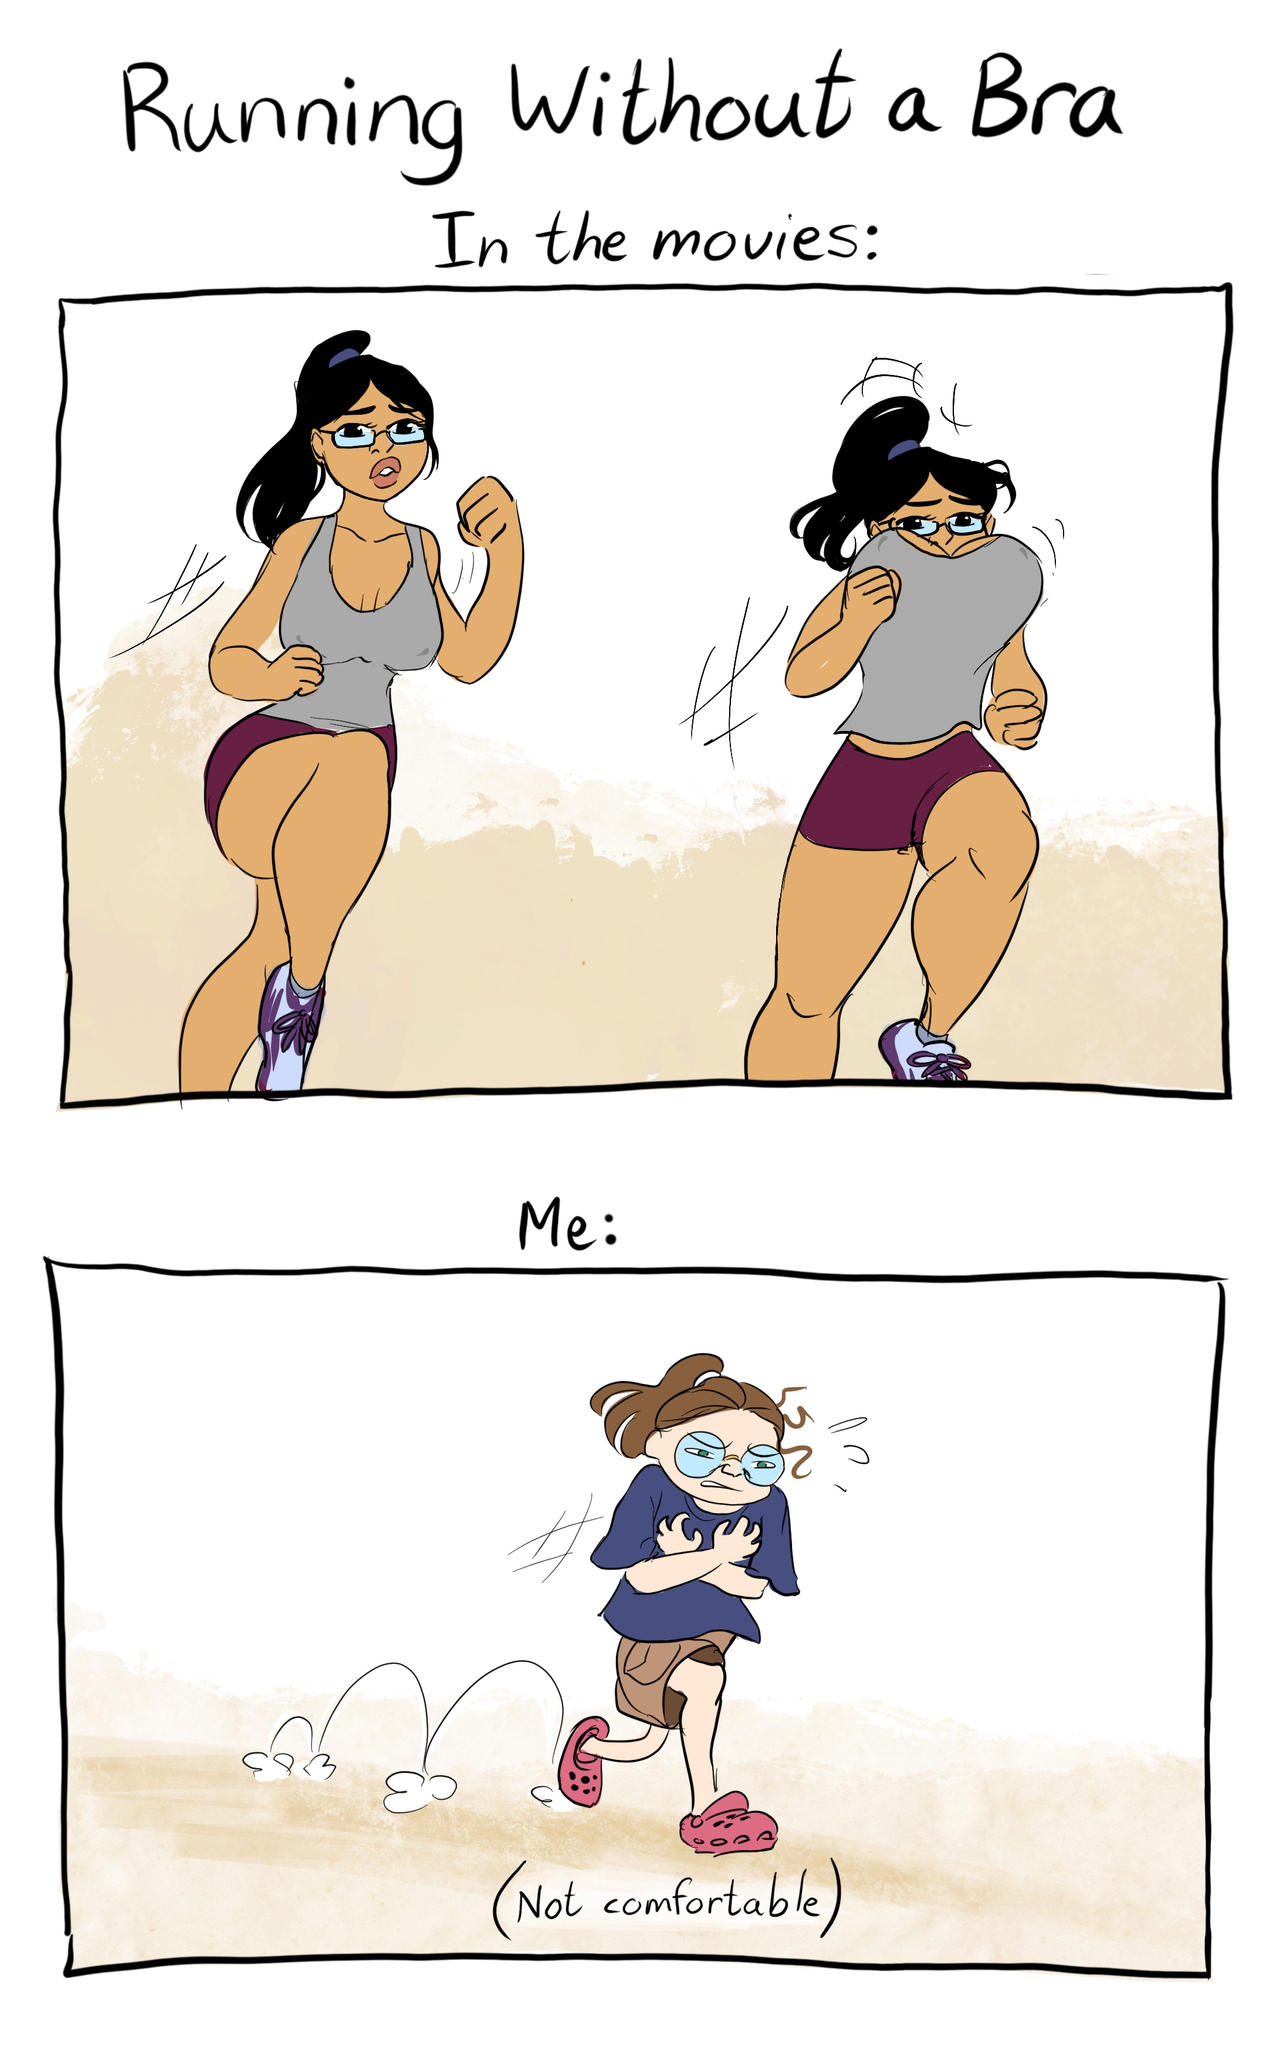 Running Without a Bra by UltimateEmpress on DeviantArt